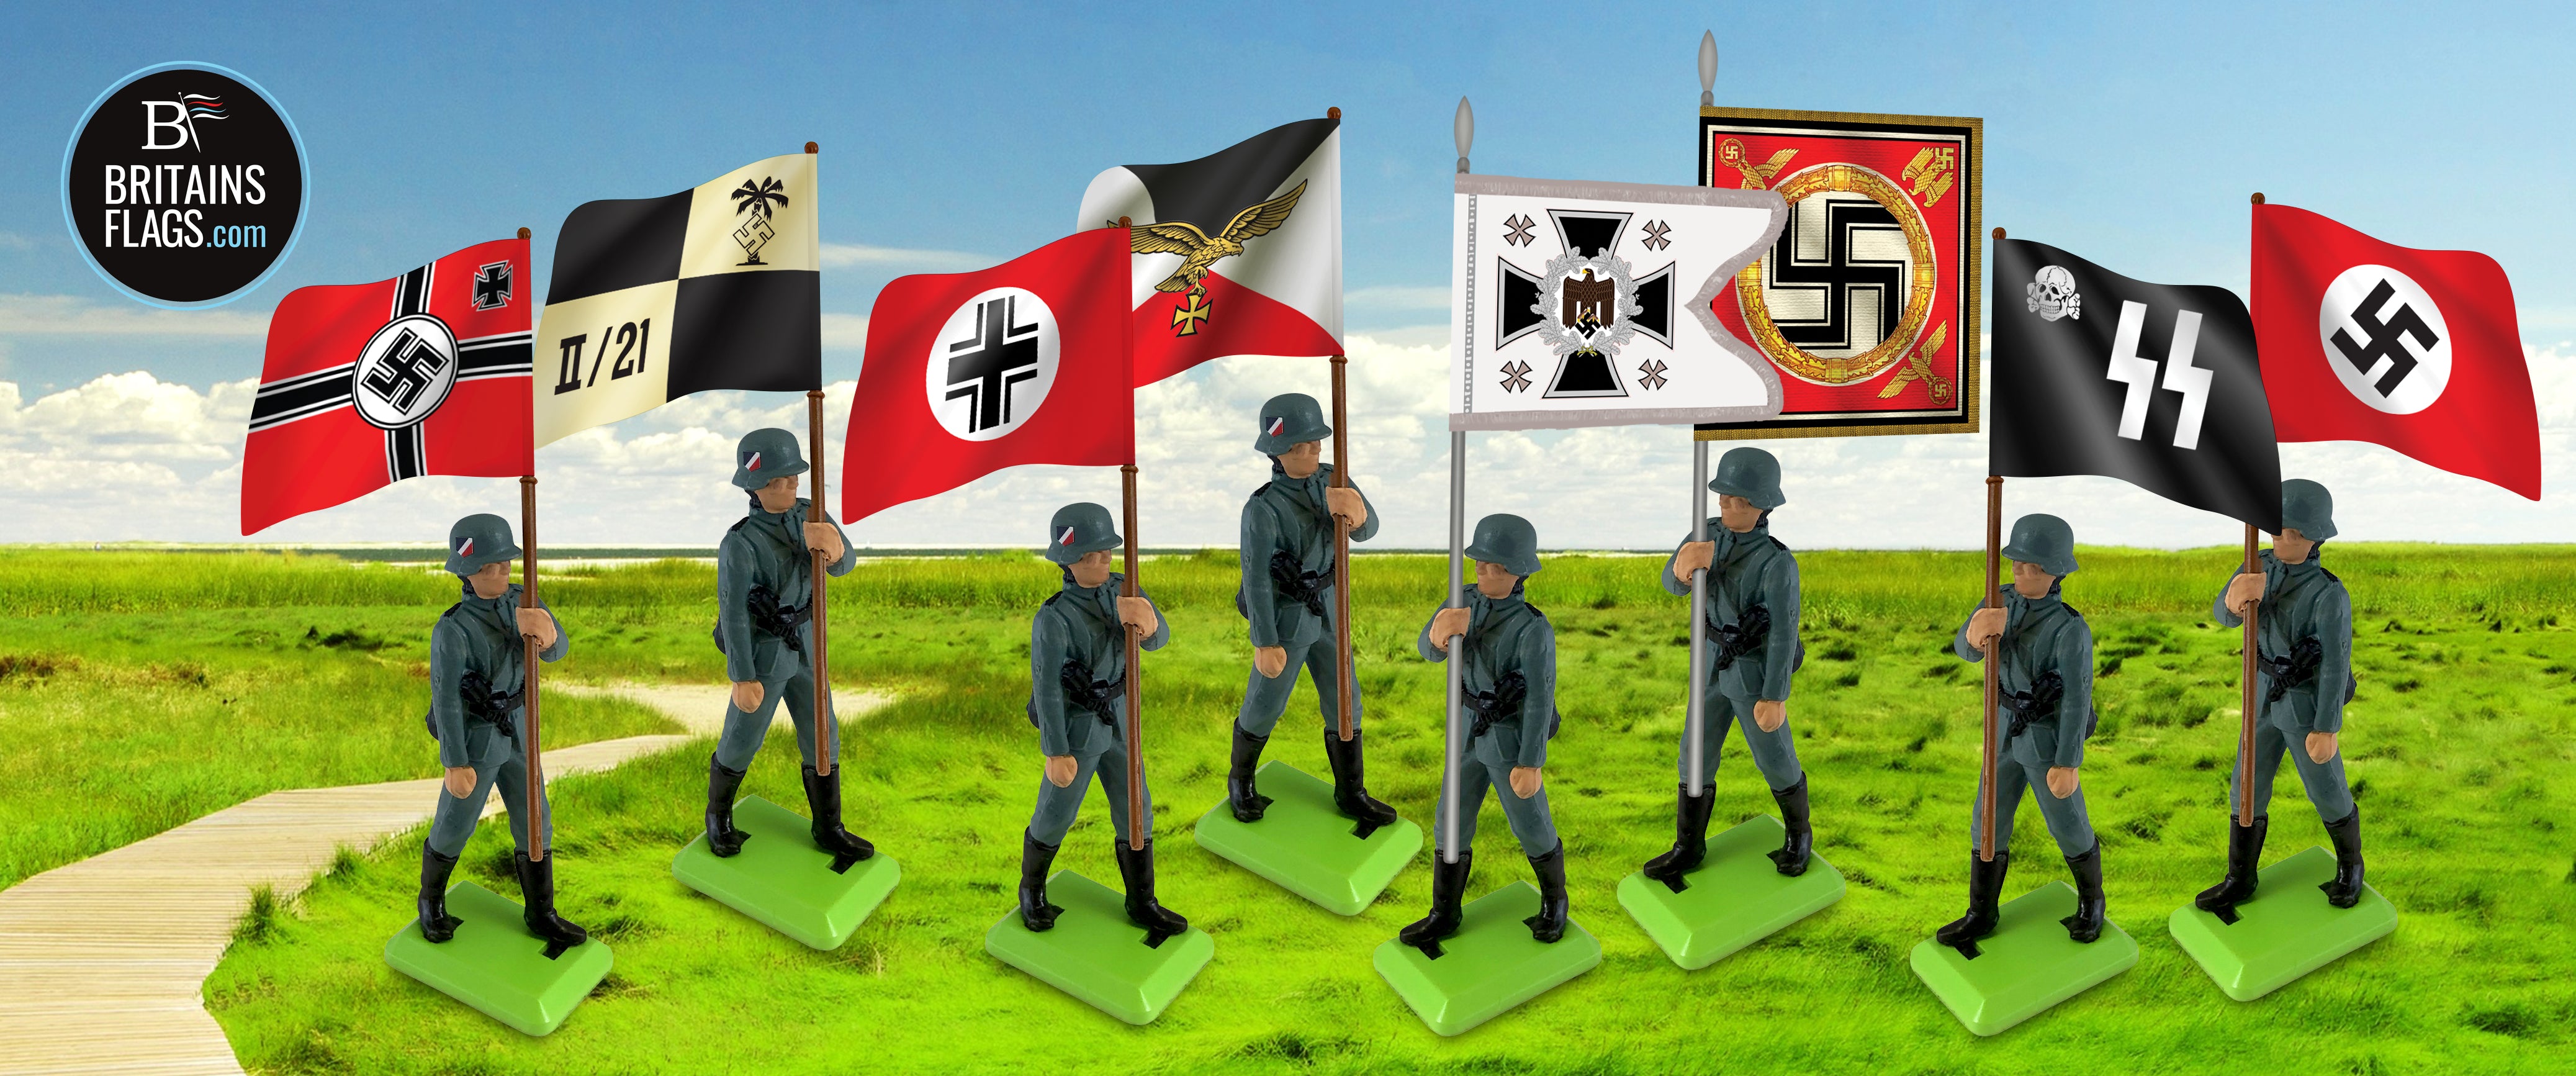 Britains Flags: The Flags of World War II Germany